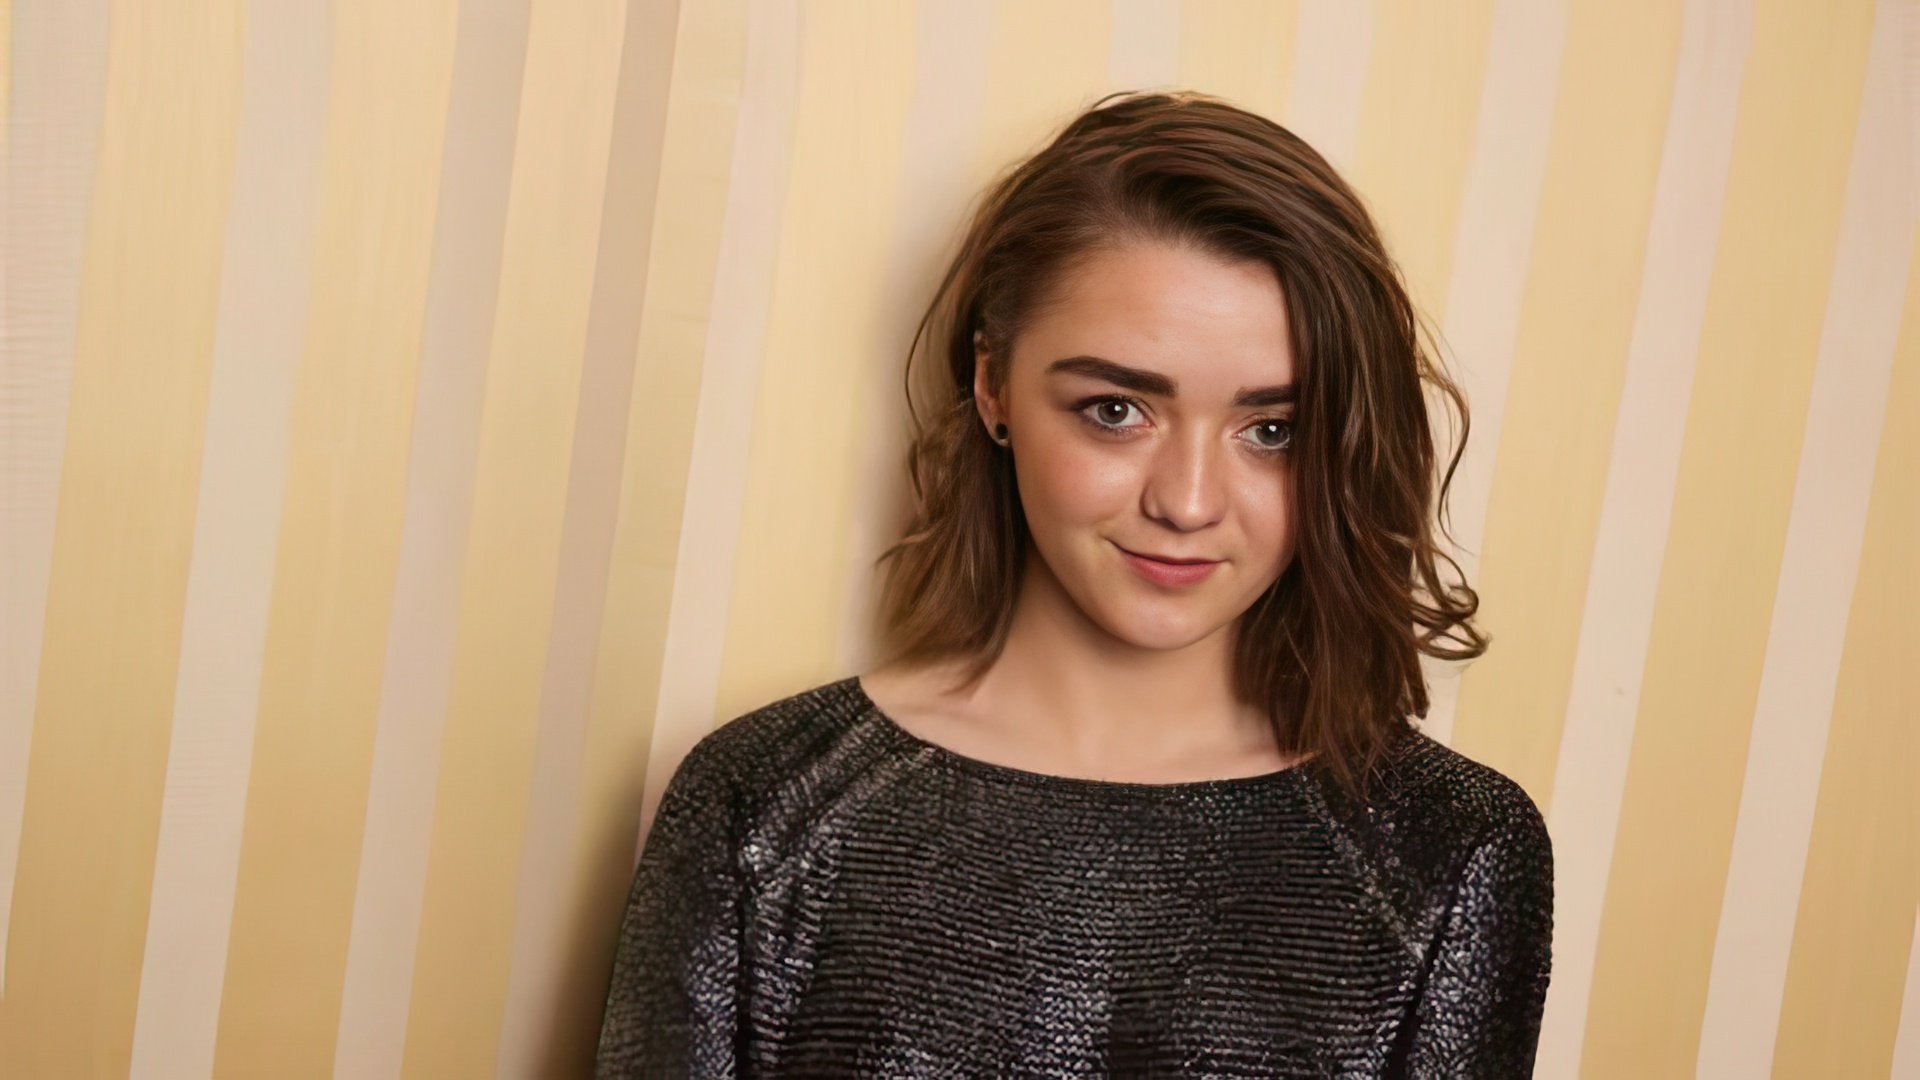 The first casting of Maisie Williams was failure